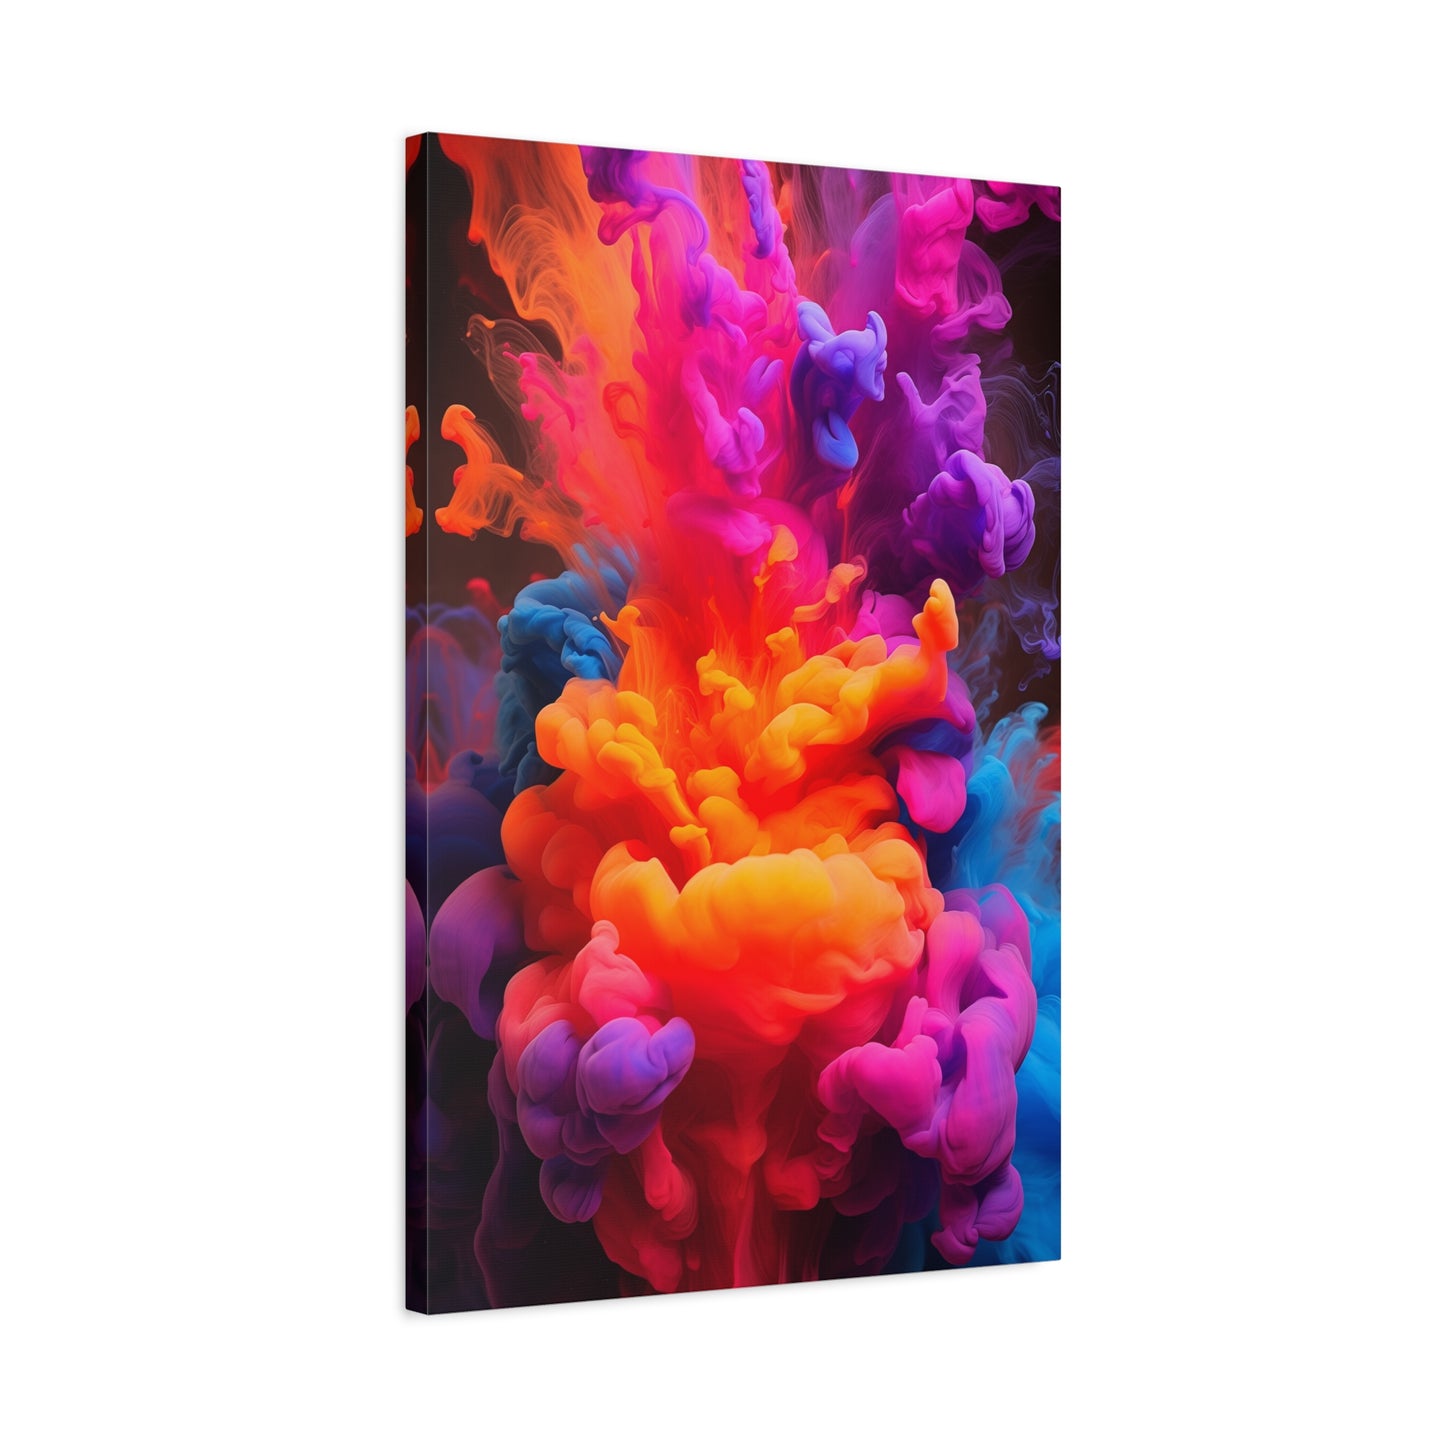 Neon Smoke (Canvas)Neon Smoke (Canvas  Matte finish, stretched, with a depth of 1.25 inches)
Make an art statement with RimaGallery's responsibly made canvases. Eco-friendly cotton/polRimaGallery